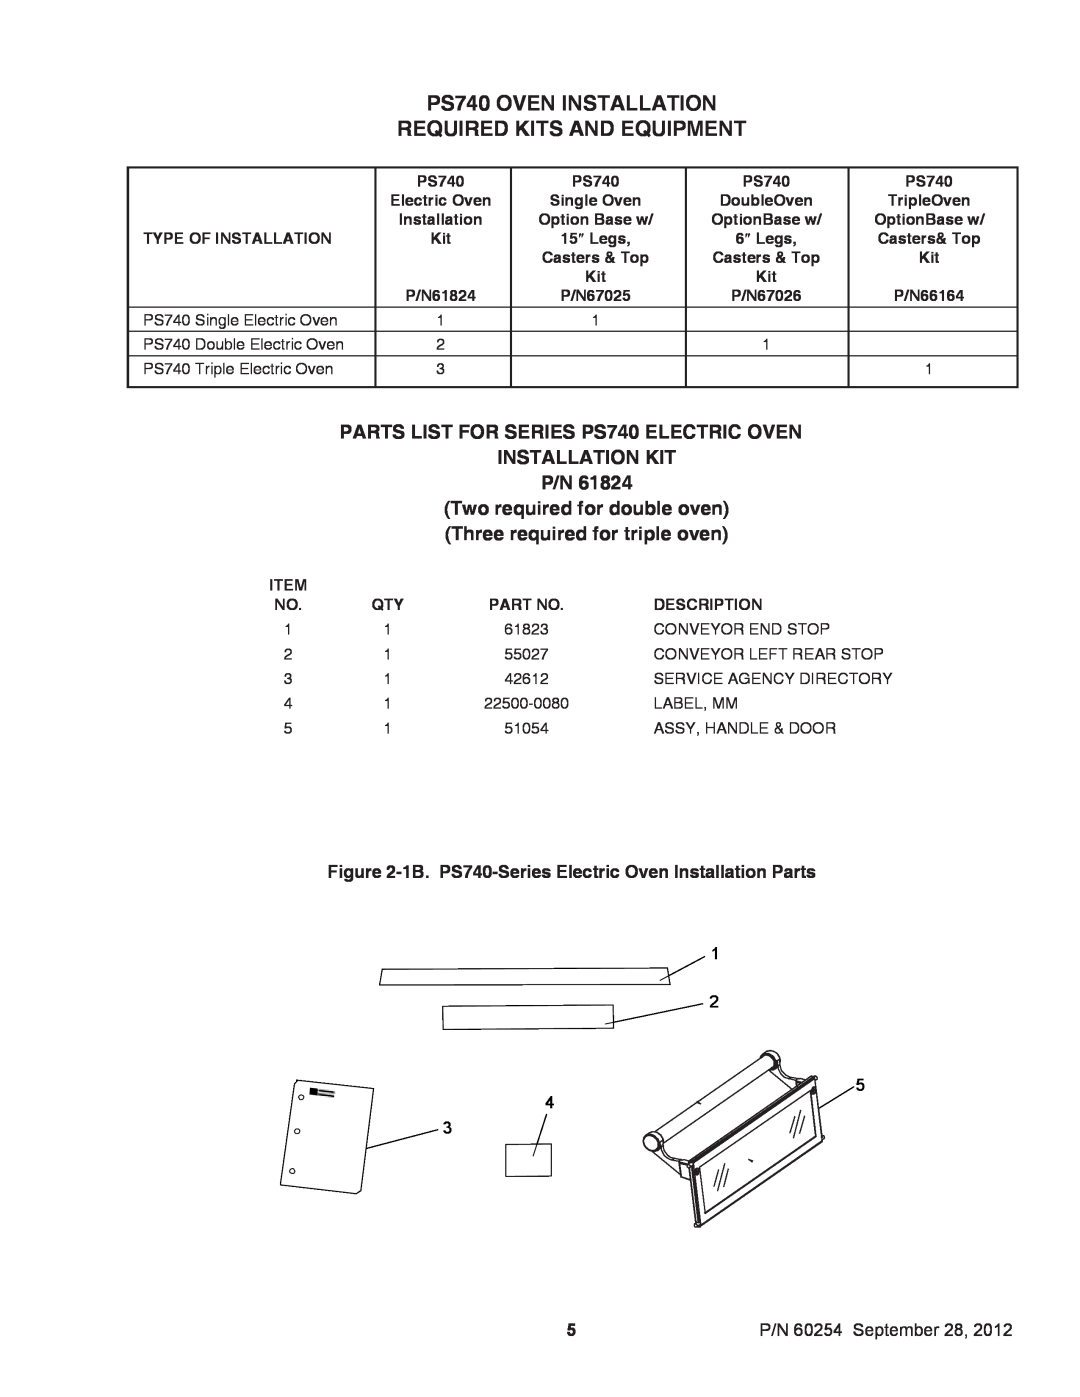 Middleby Marshall PS740 OVEN INSTALLATION REQUIRED KITS AND EQUIPMENT, P/N 60254 September 28, Electric Oven, 6 ″ Legs 